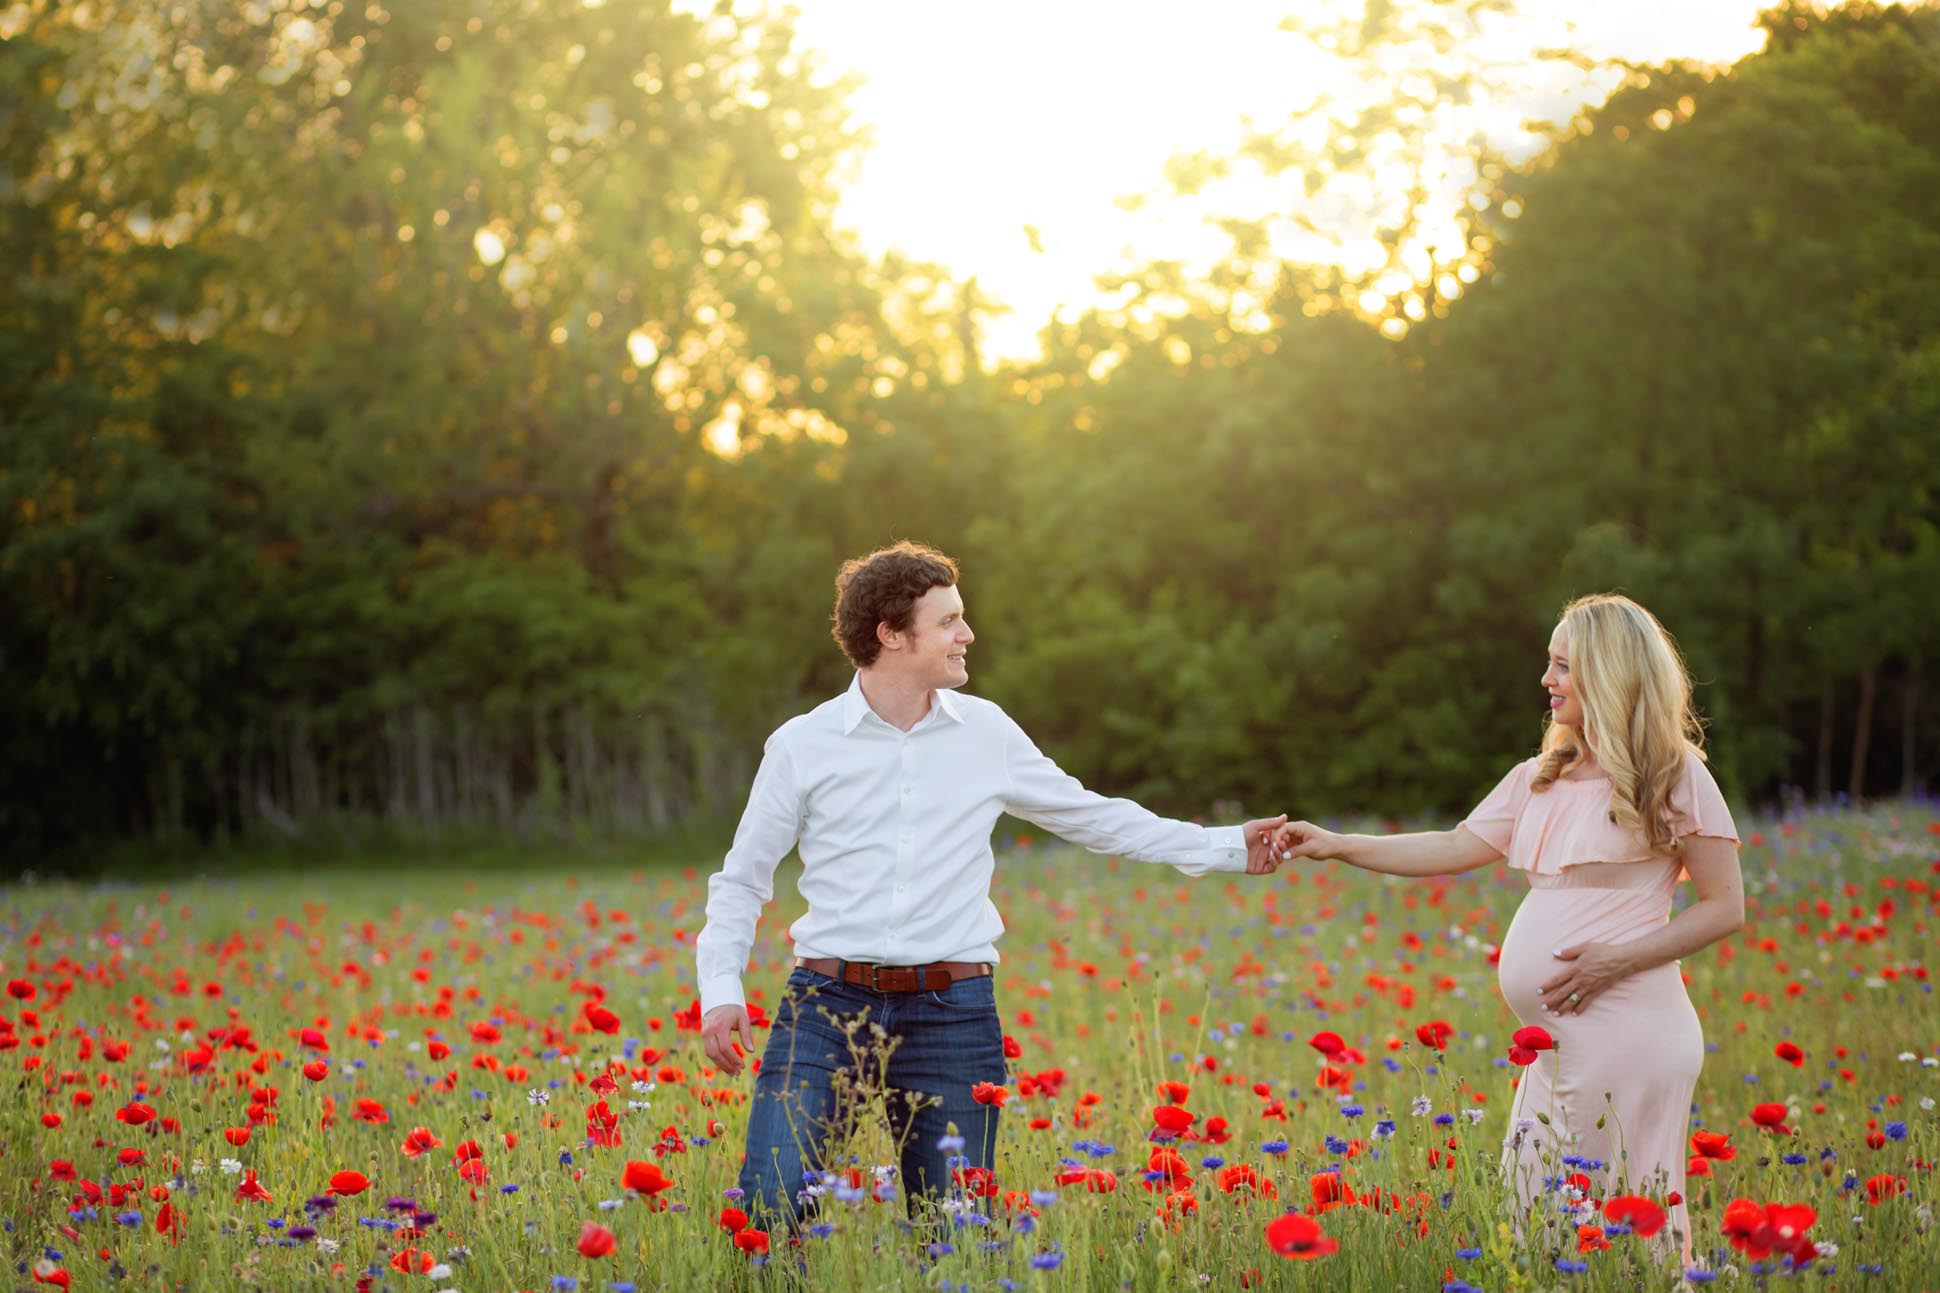 Dallas maternity photographer shares portrait of pregnant mom and husband in a field of flowers in Richardson Texas